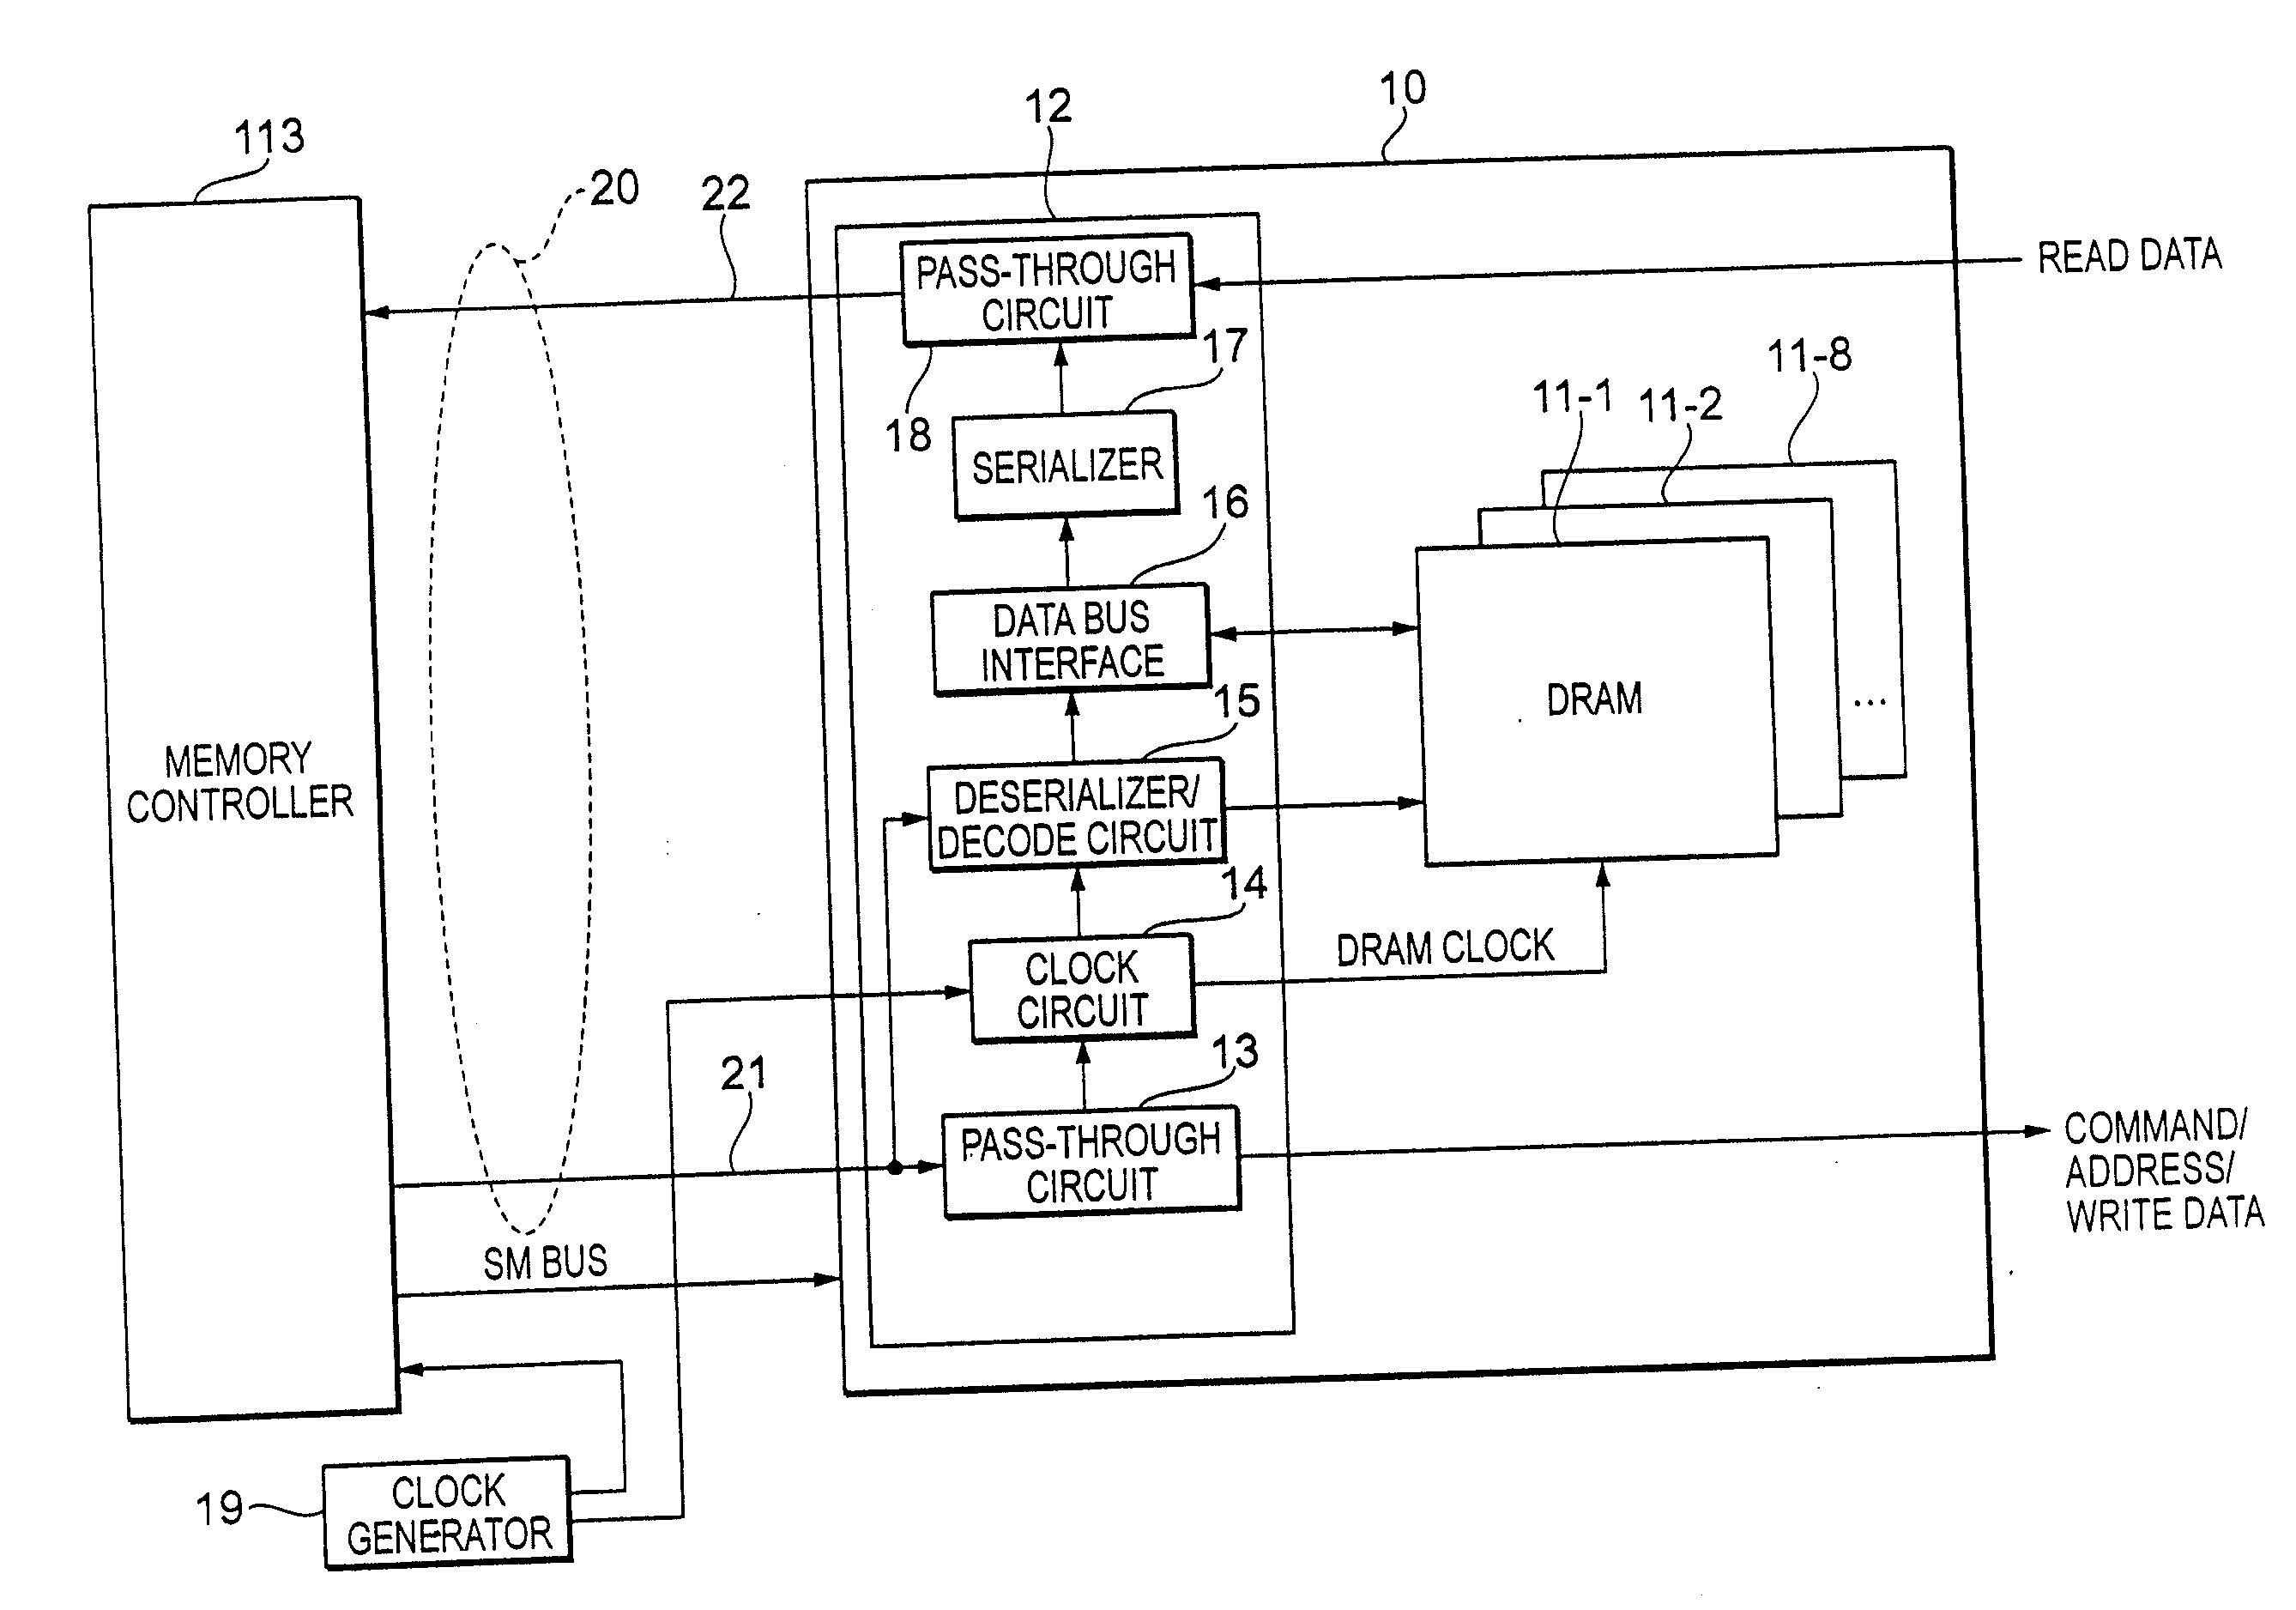 Arrangements which write same data as data stored in a first cache memory module, to a second cache memory module